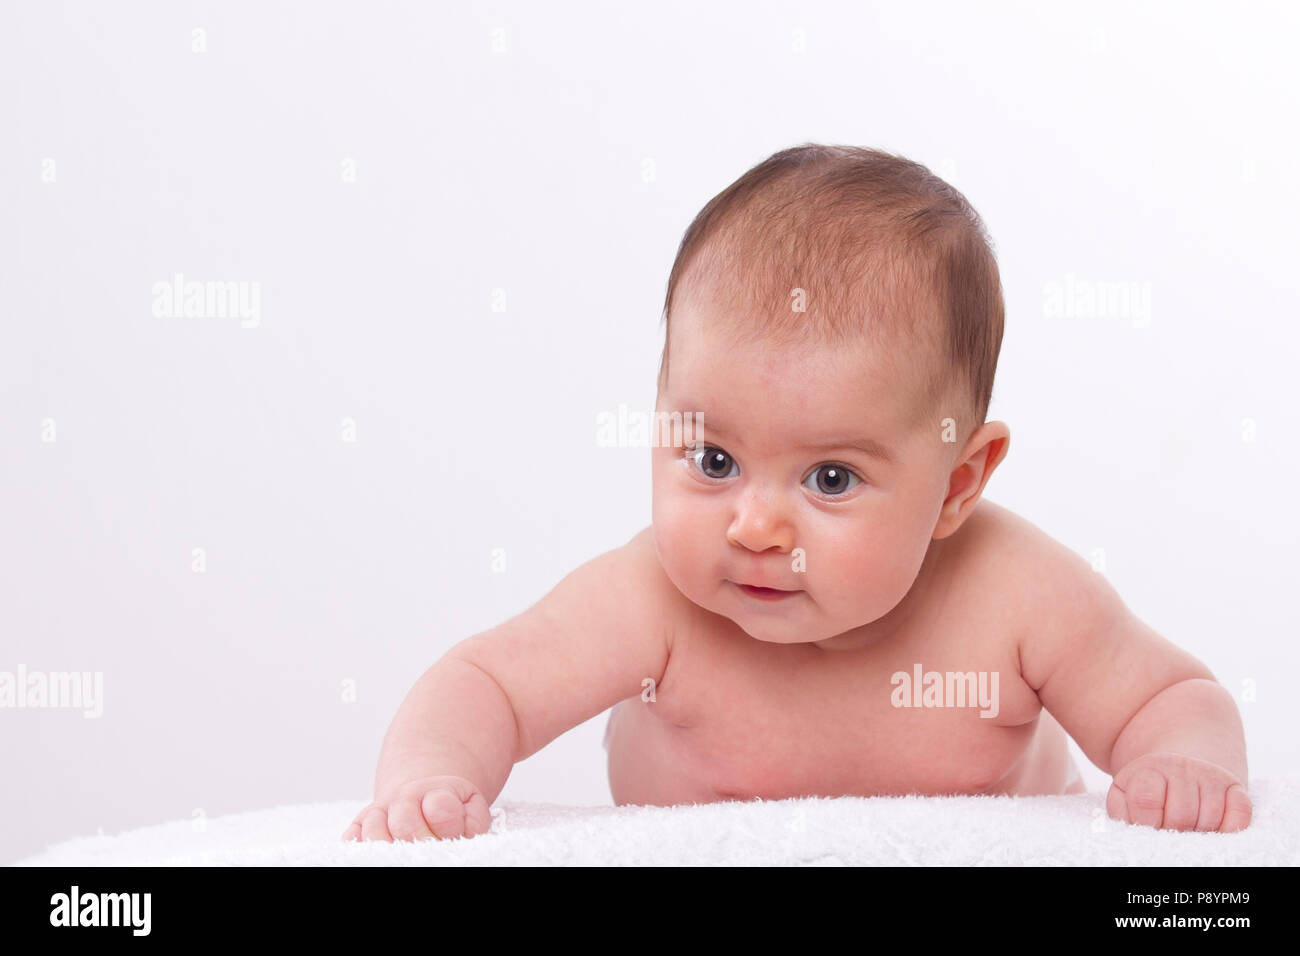 Cute baby portrait close up baby Stock Photo